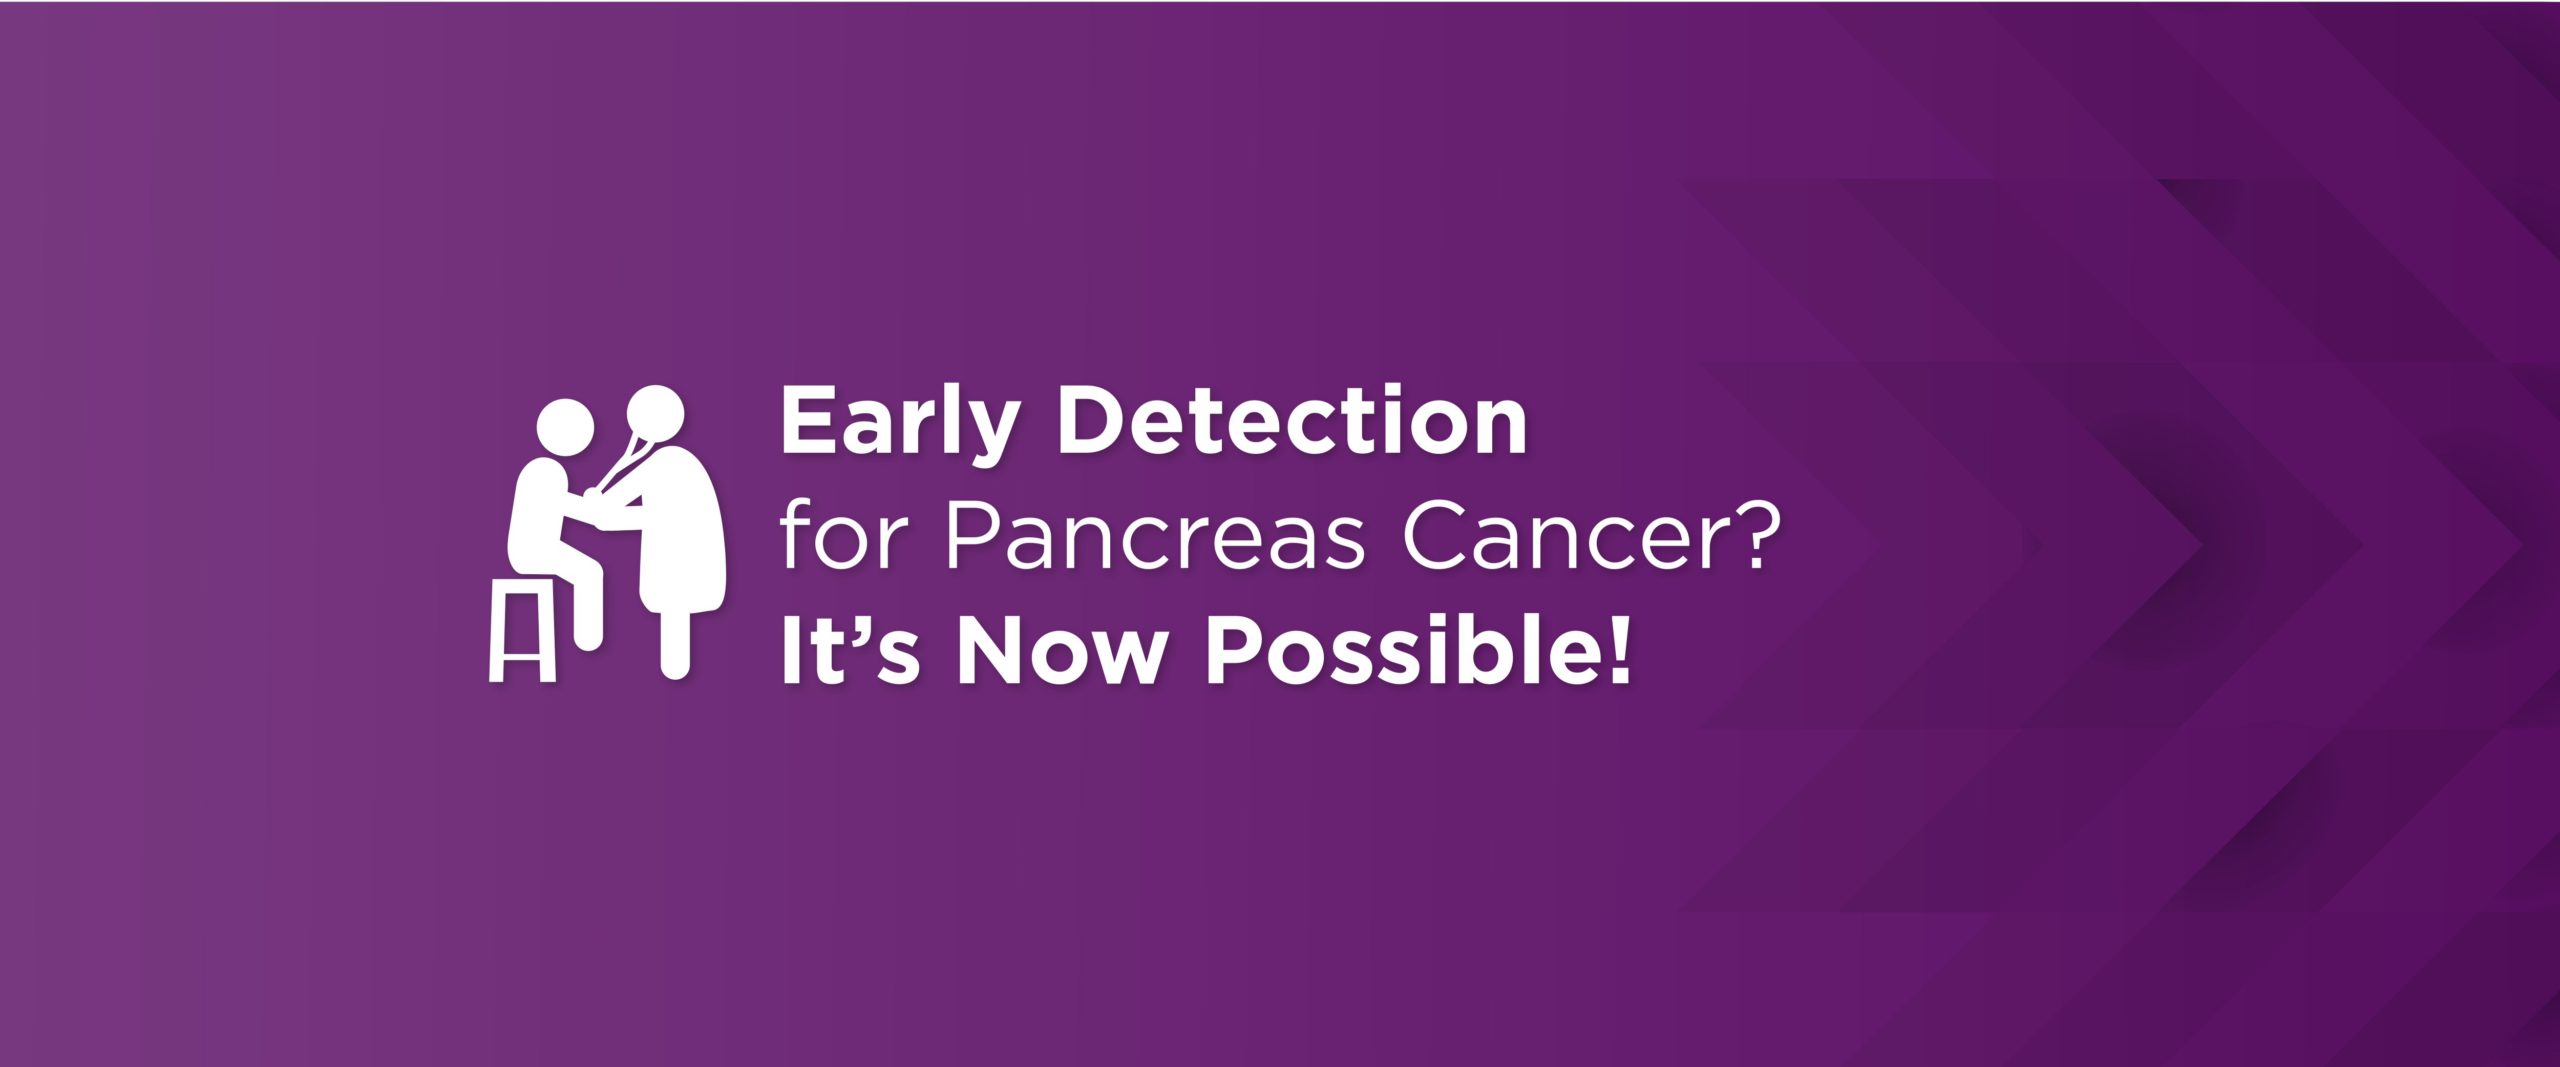 Early Detection for Pancreas Cancer? It's Now Possible! Blog